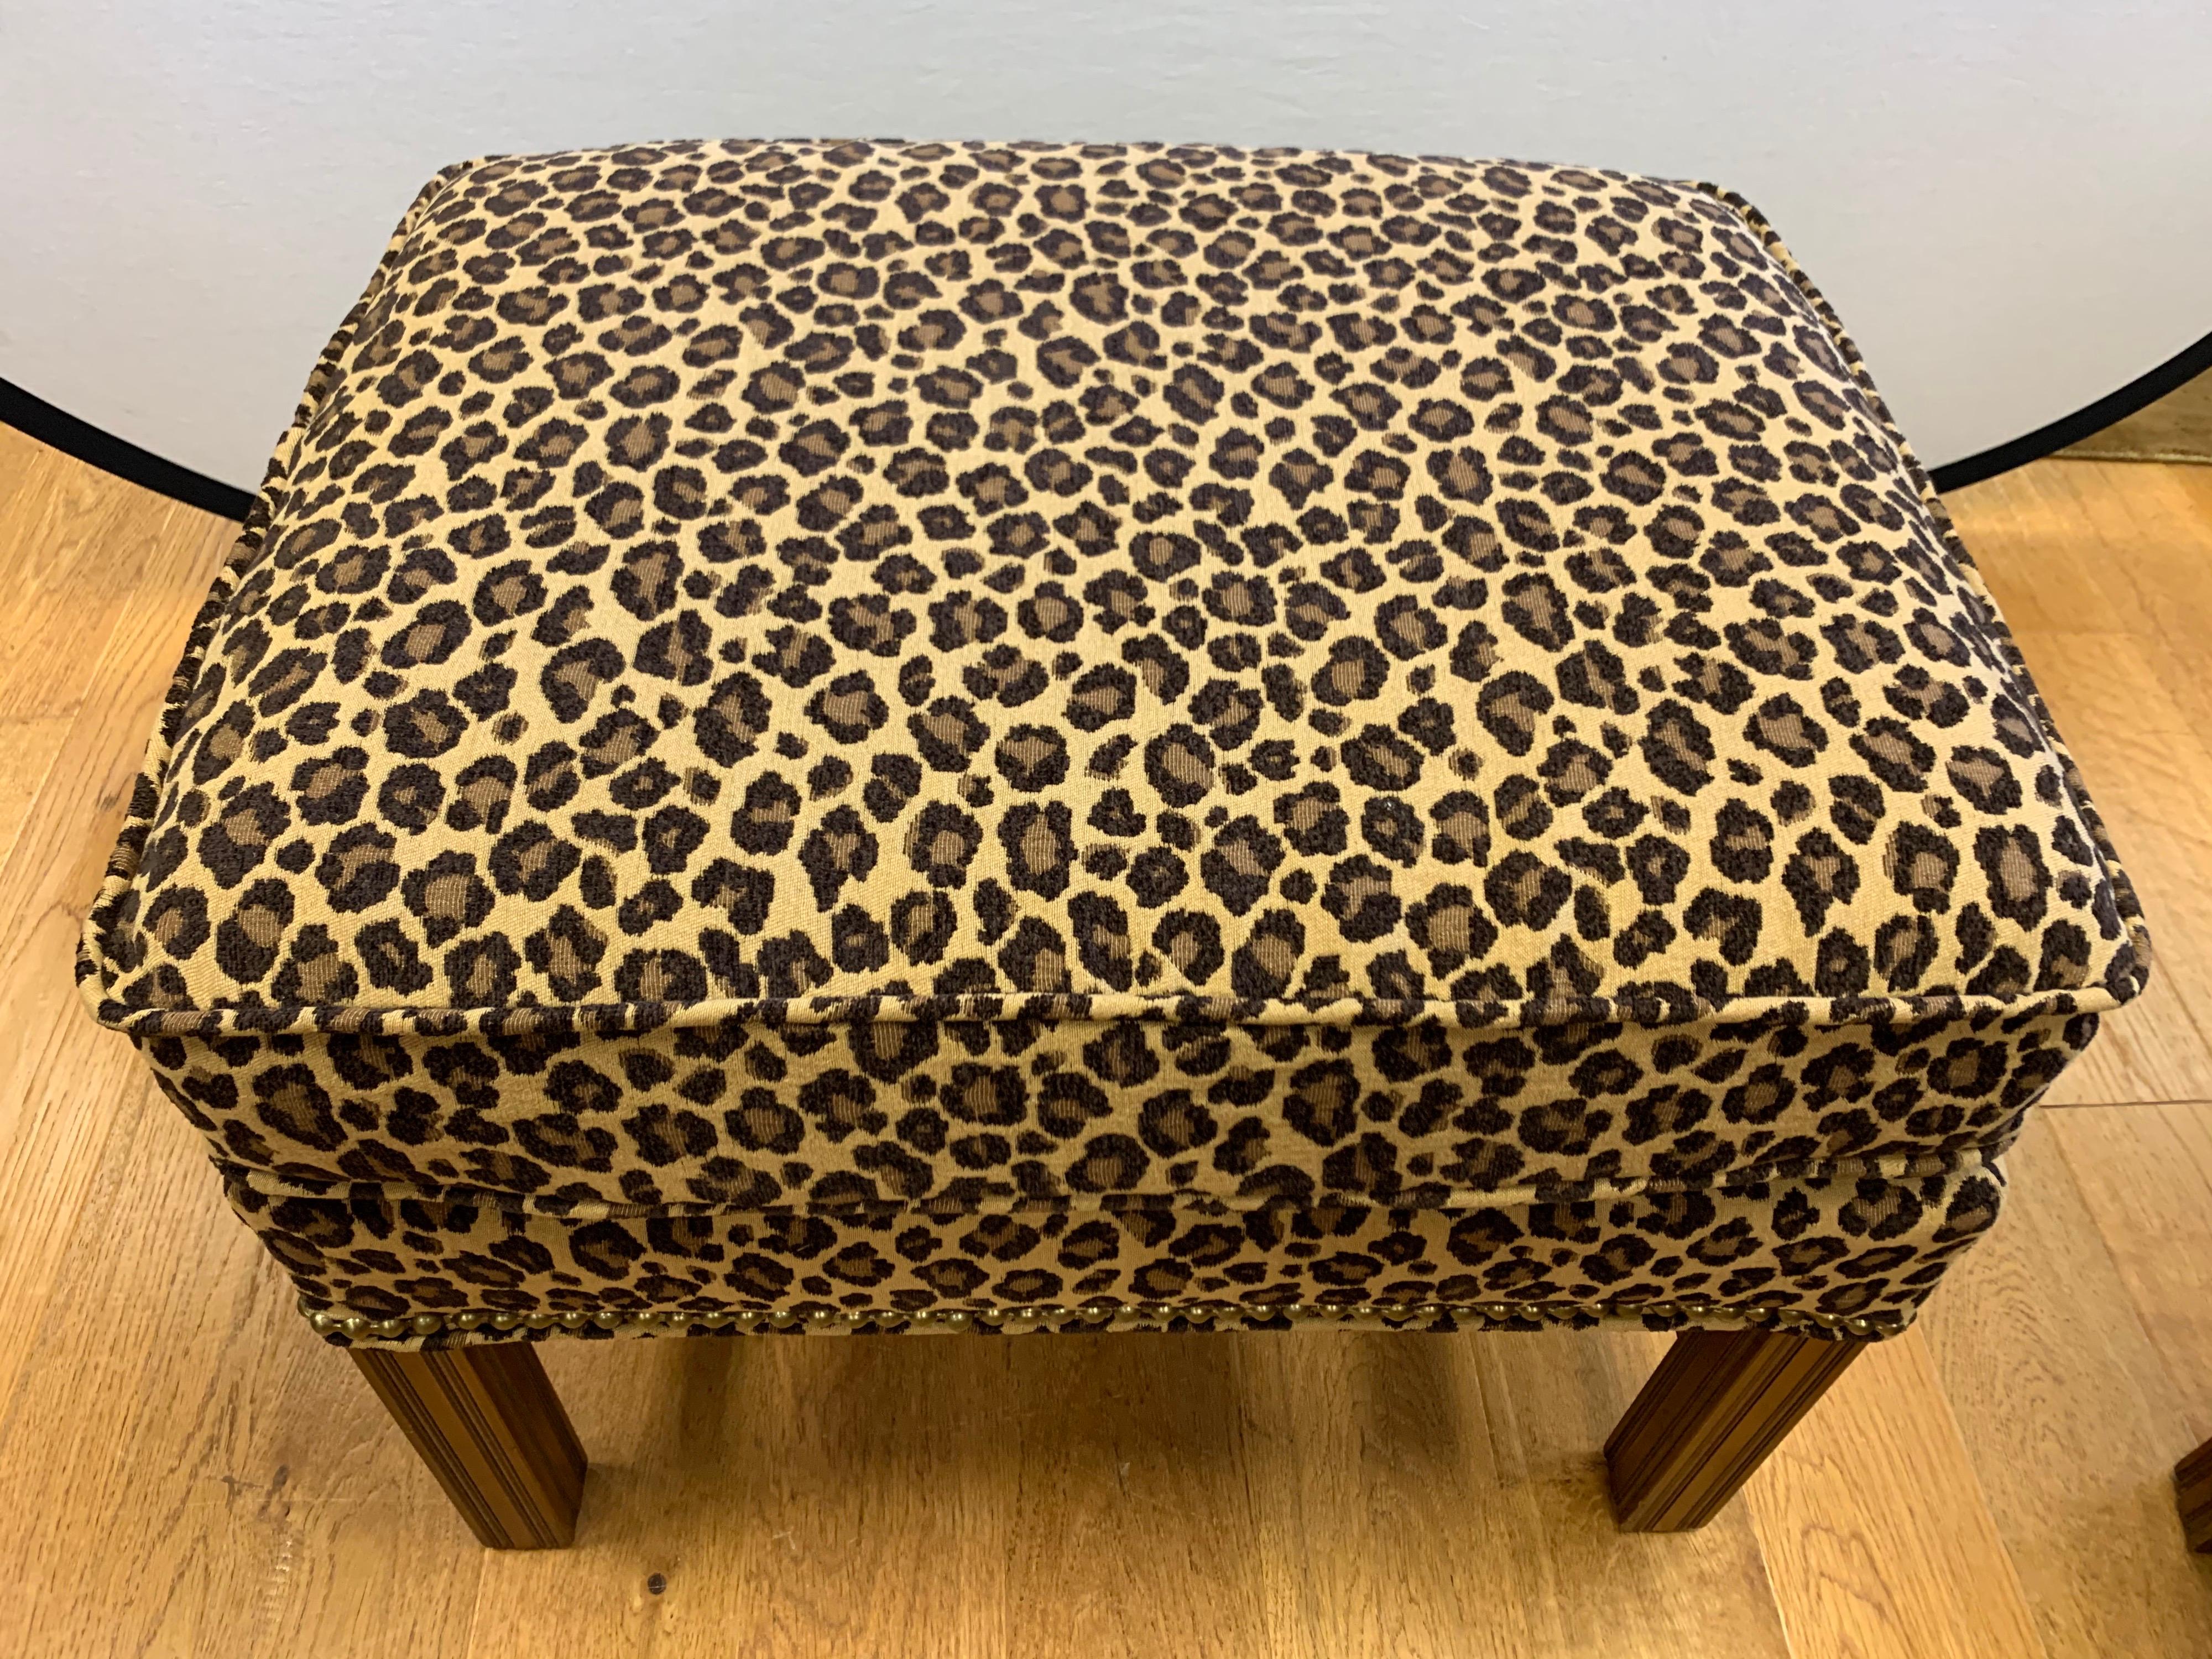 Pair of Berhardt Leopard Print Ottomans Stools Nailhead Newly Upholstered 3